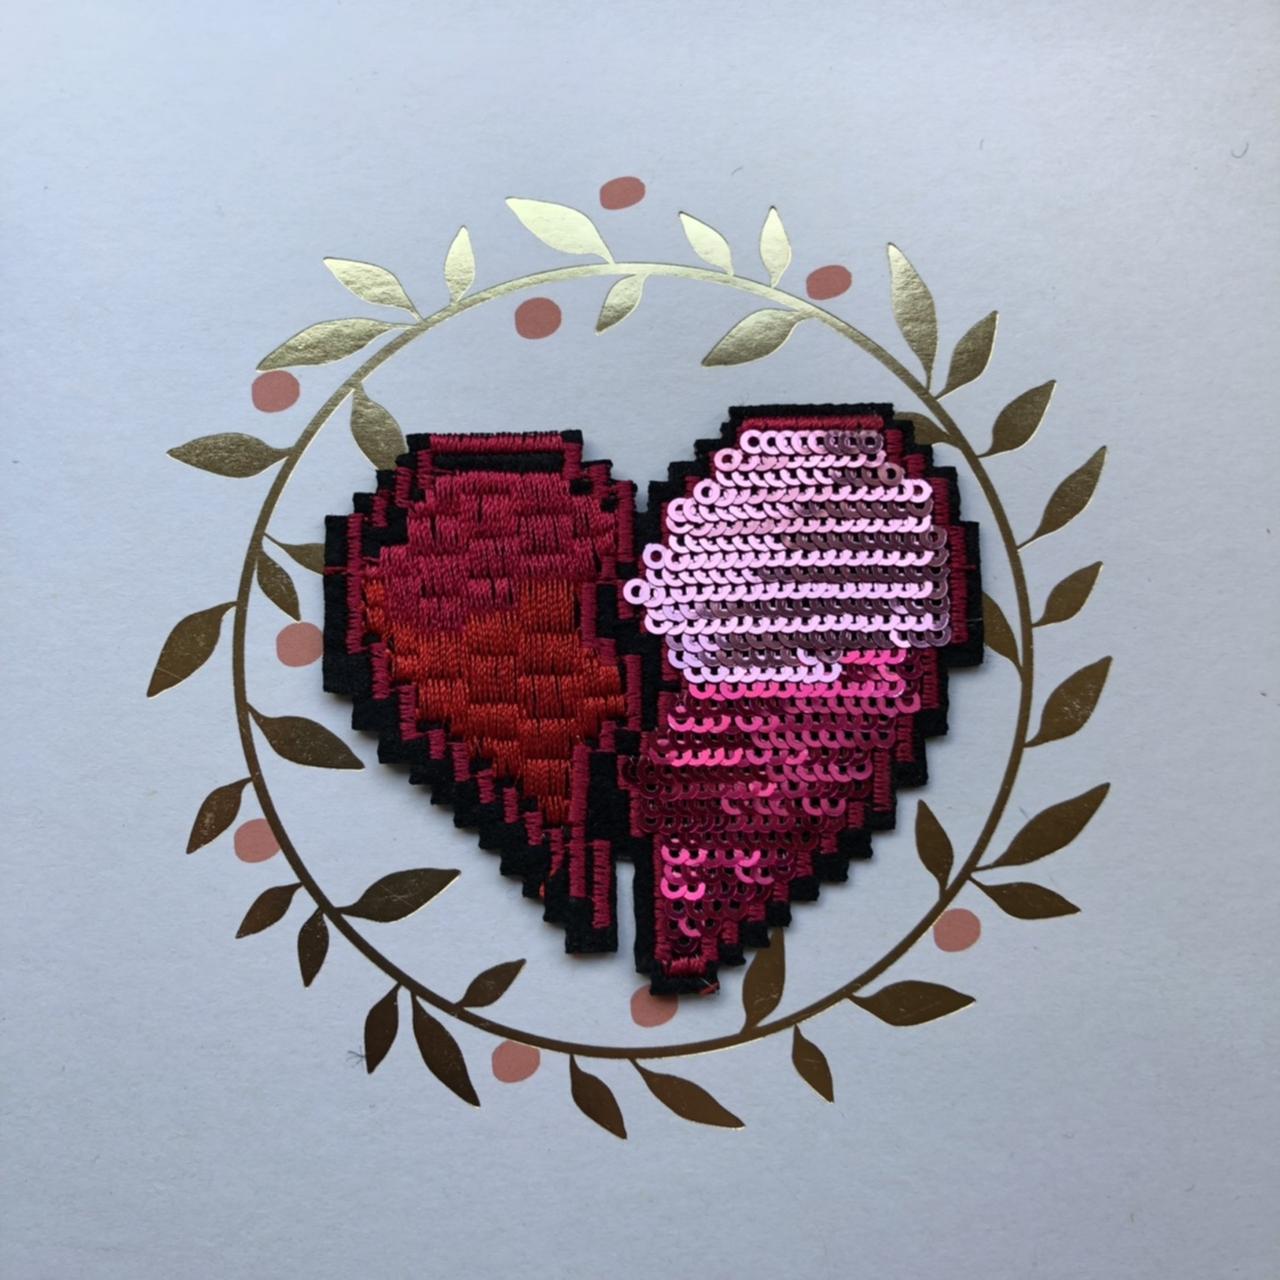 Broken Heart Embroidered Iron on Patch Red